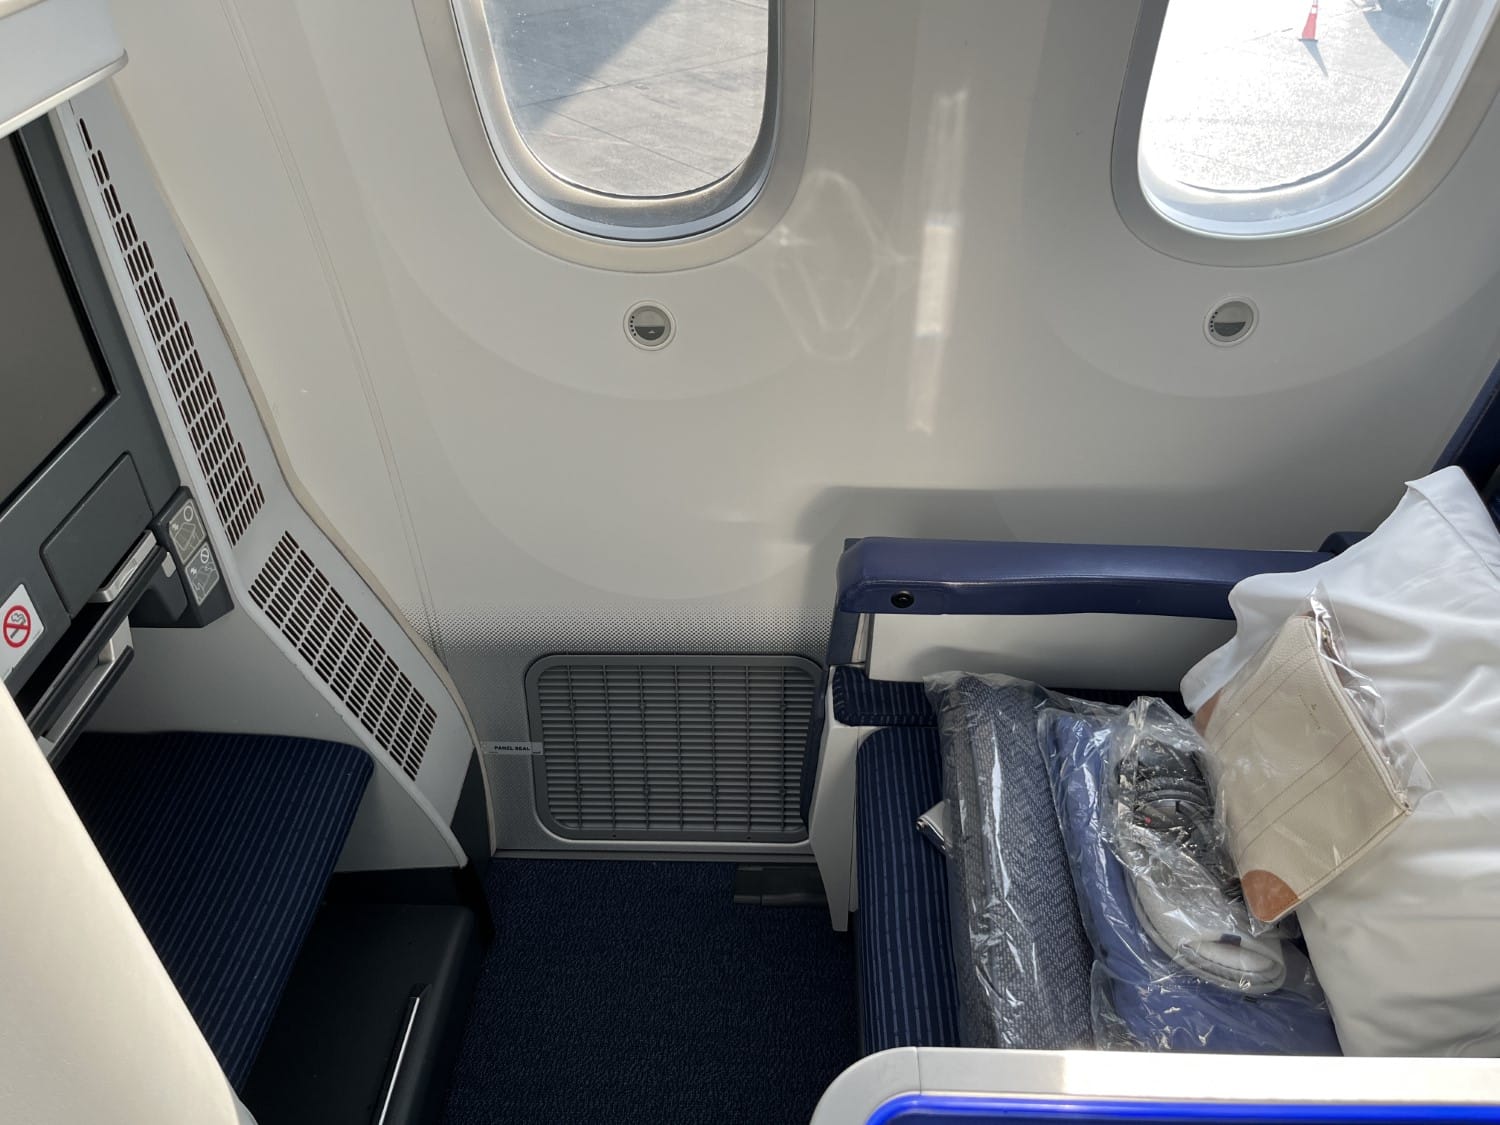 ana business class 787 window seat overview